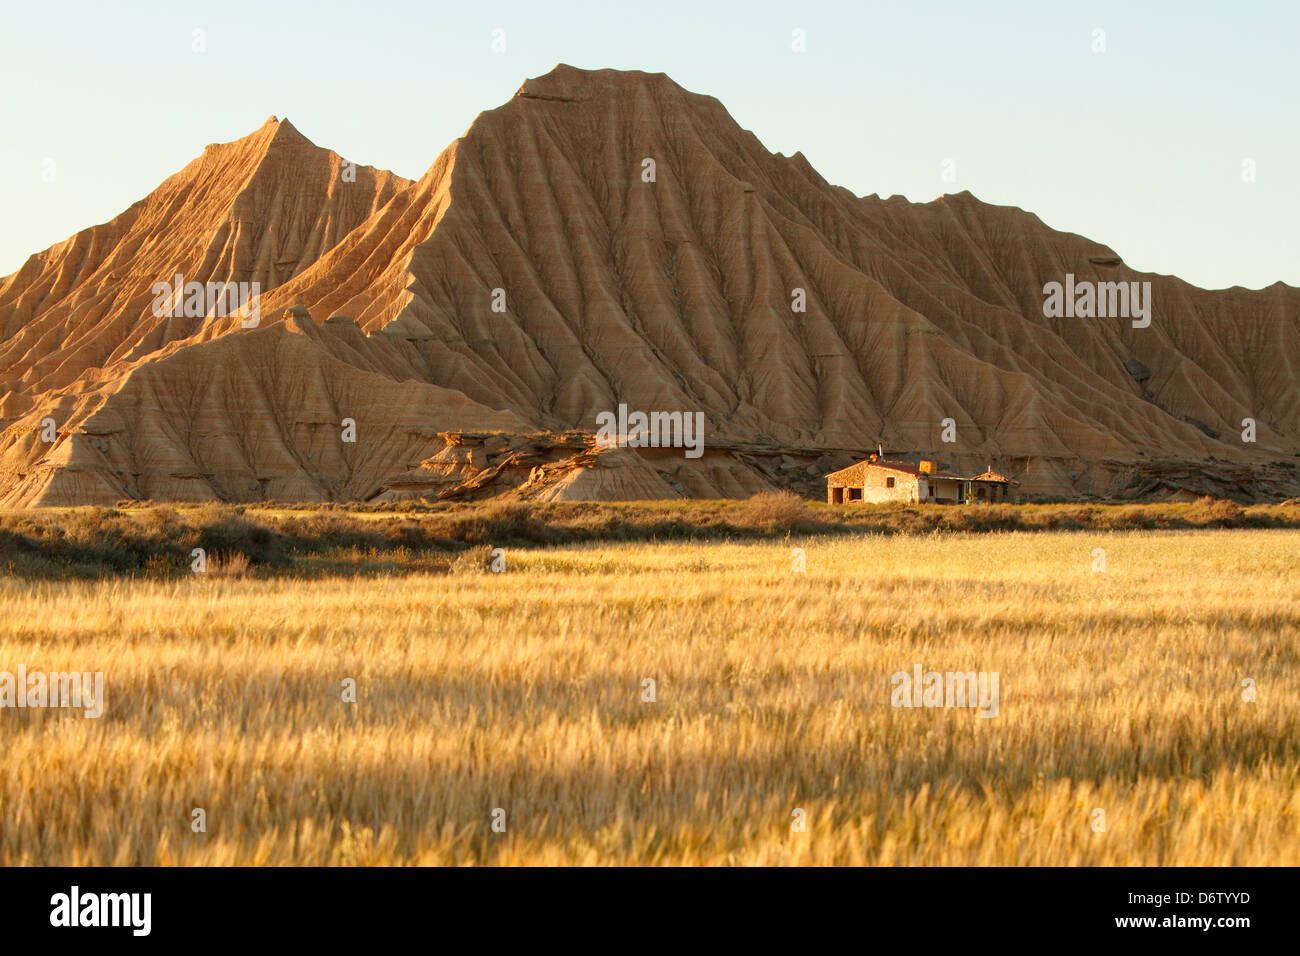 Loneliness cottage in Bardenas Reales, Navarre, Spain Stock Photo